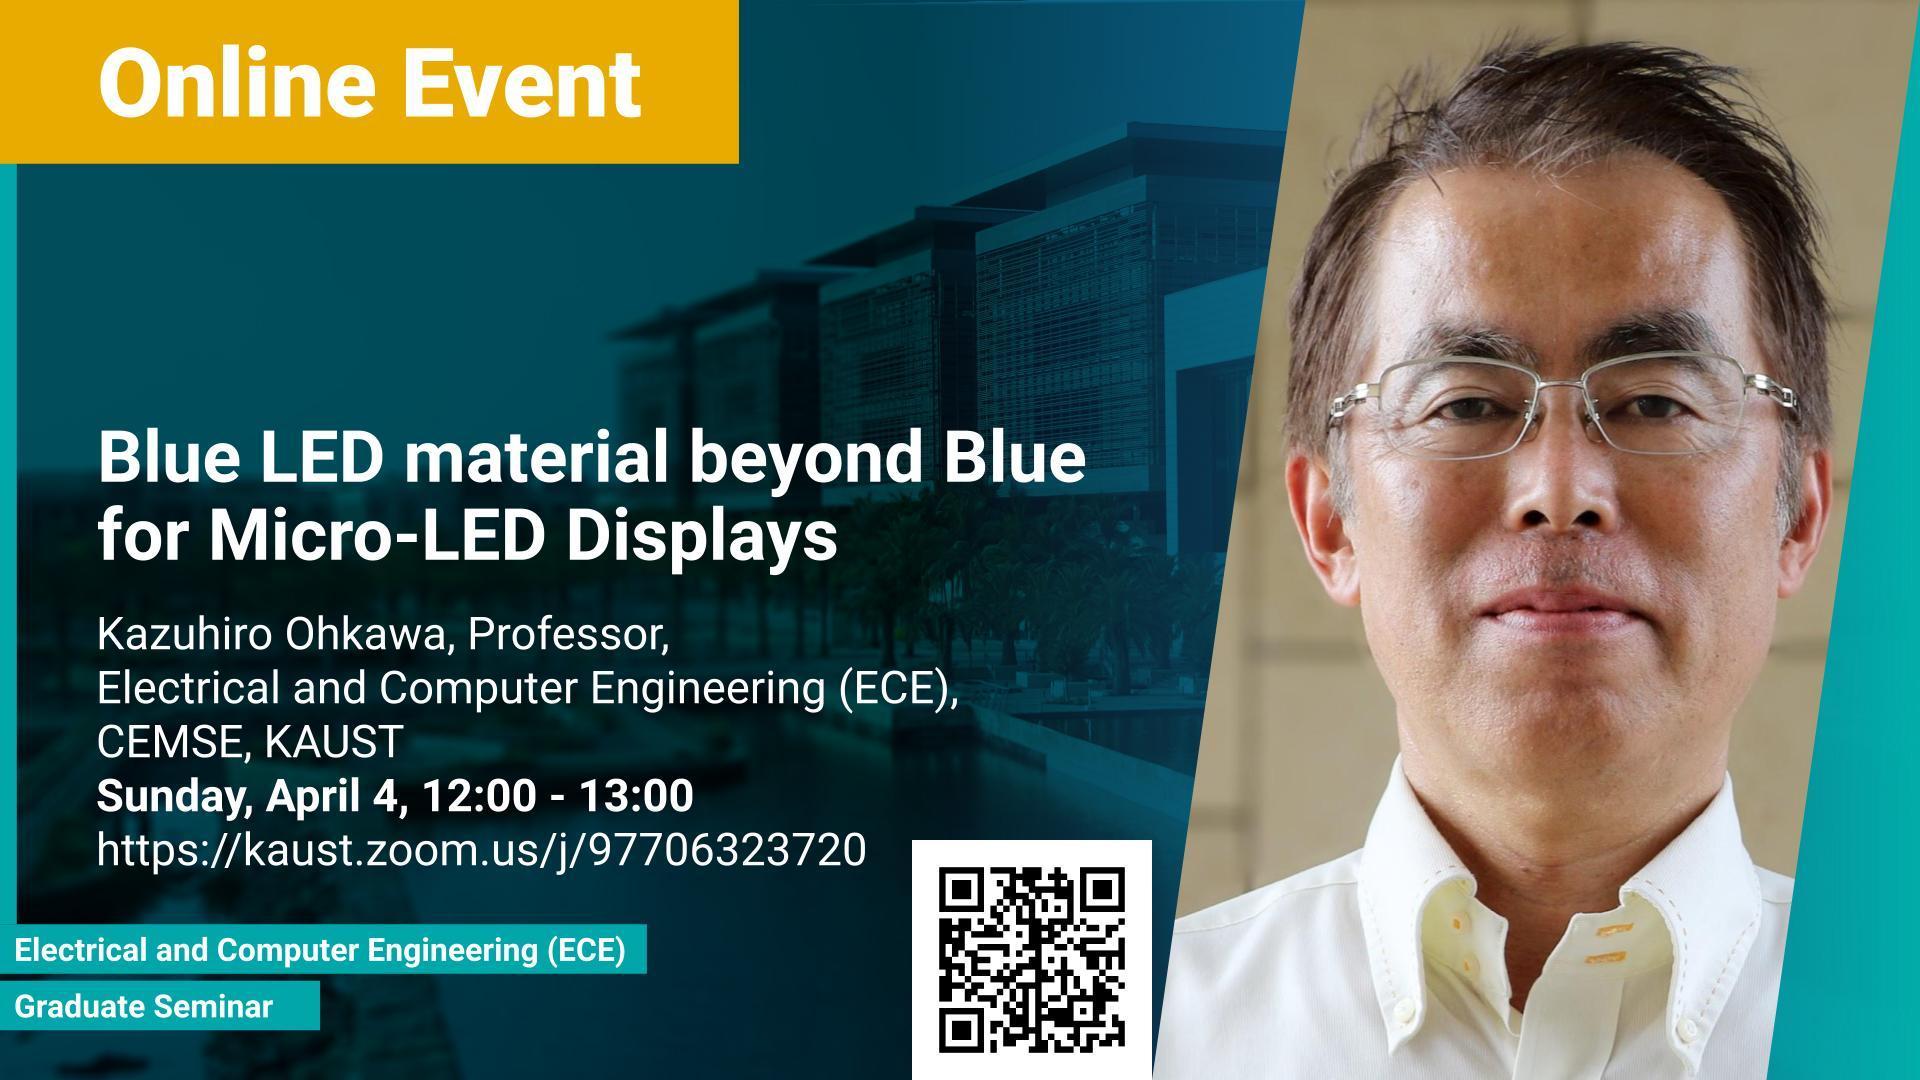 KAUST-CEMSE-ECE-Graduate-Seminar-Blue-LED-material-beyond-Blue-for-Micro-LED-Displays